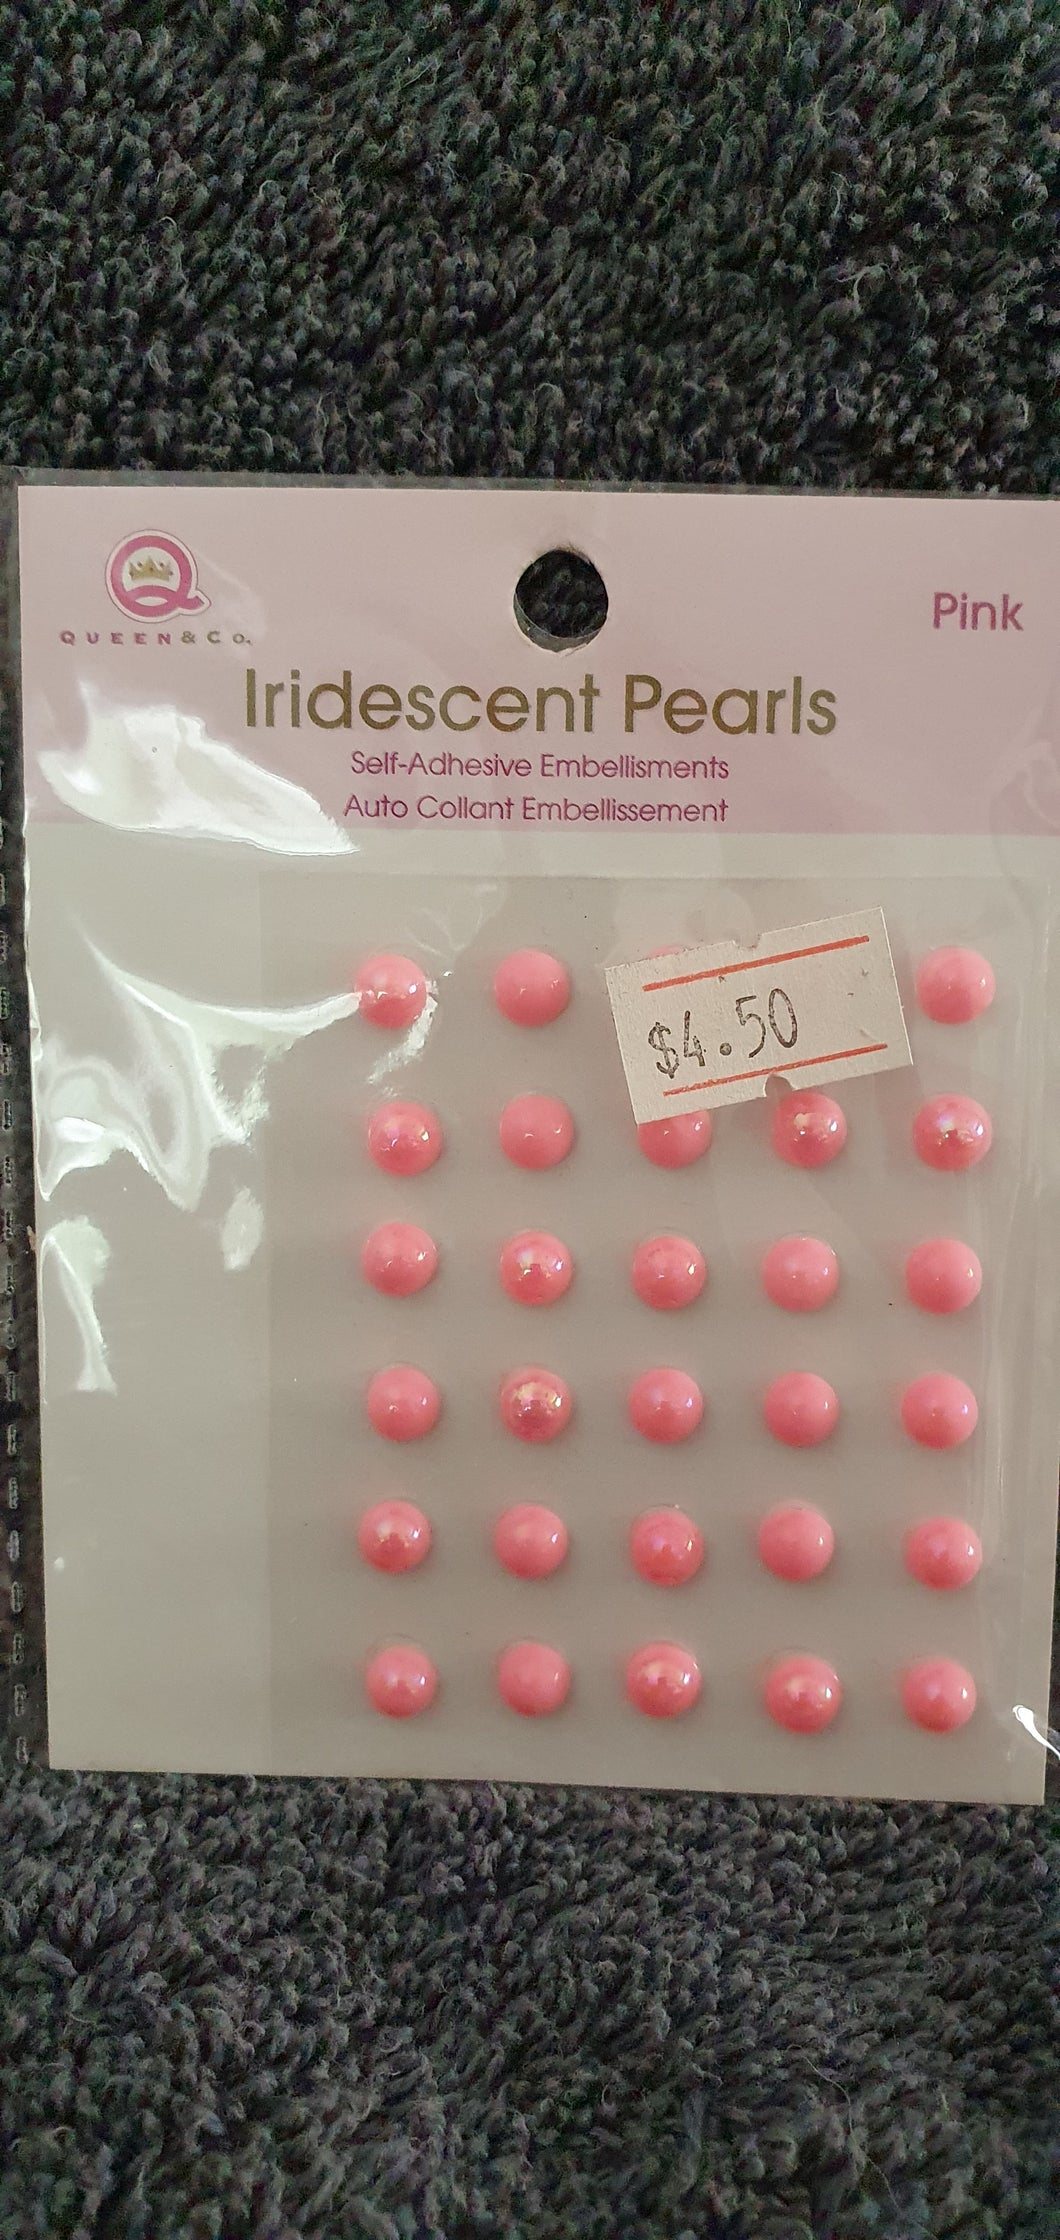 Iridescent Pearls - Pink  QUEEN and CO.